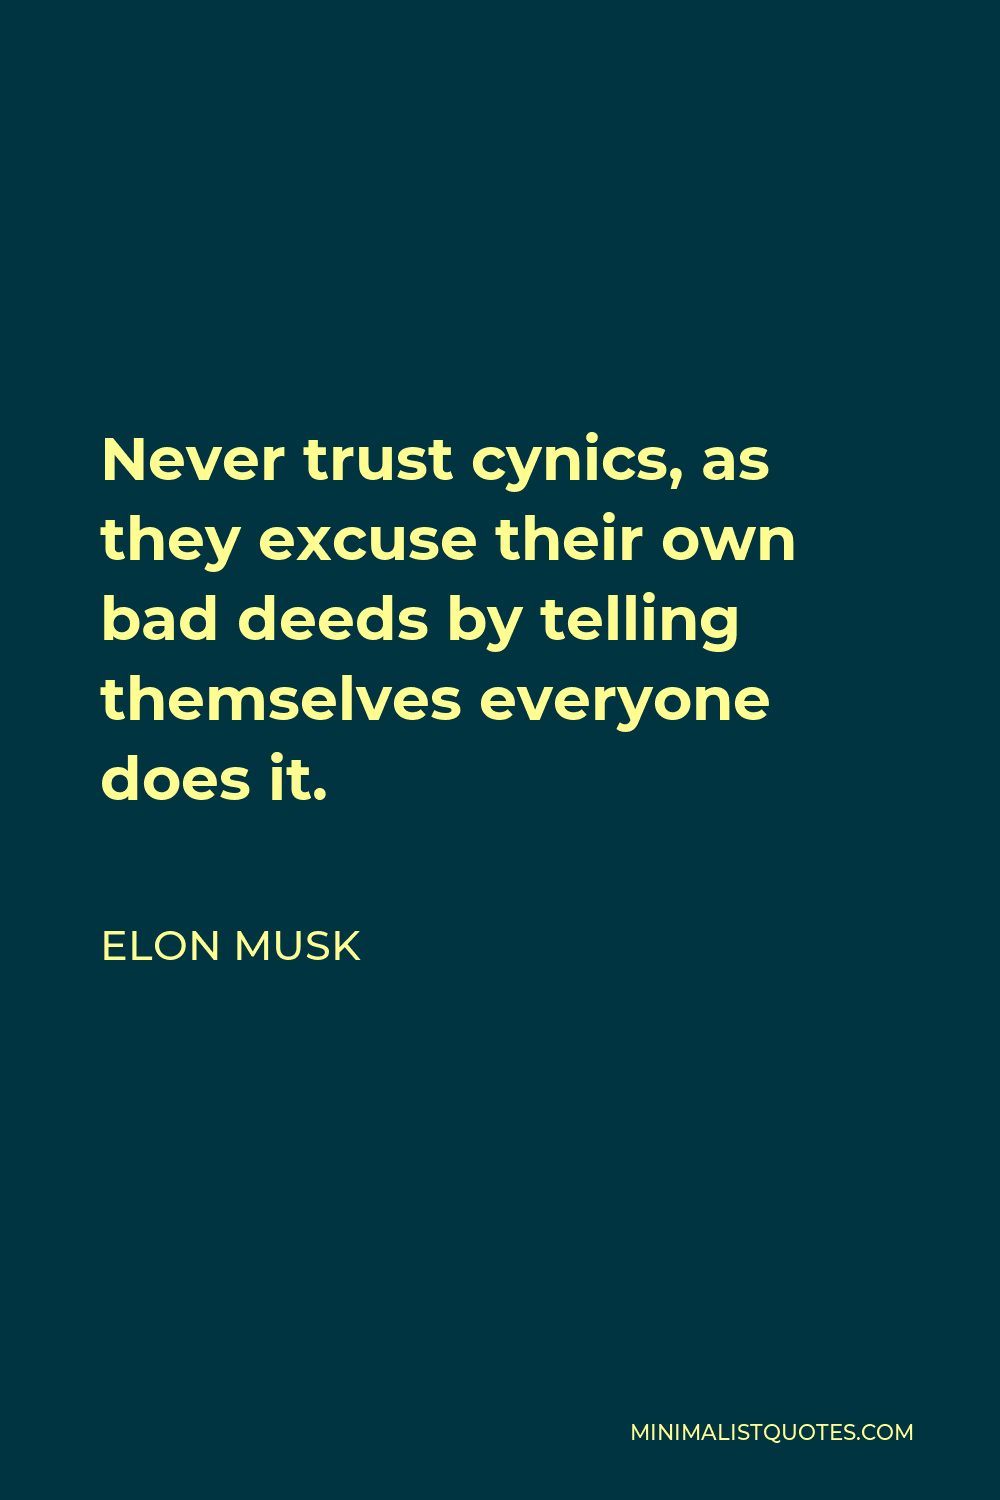 Elon Musk Quote - Never trust cynics, as they excuse their own bad deeds by telling themselves everyone does it.